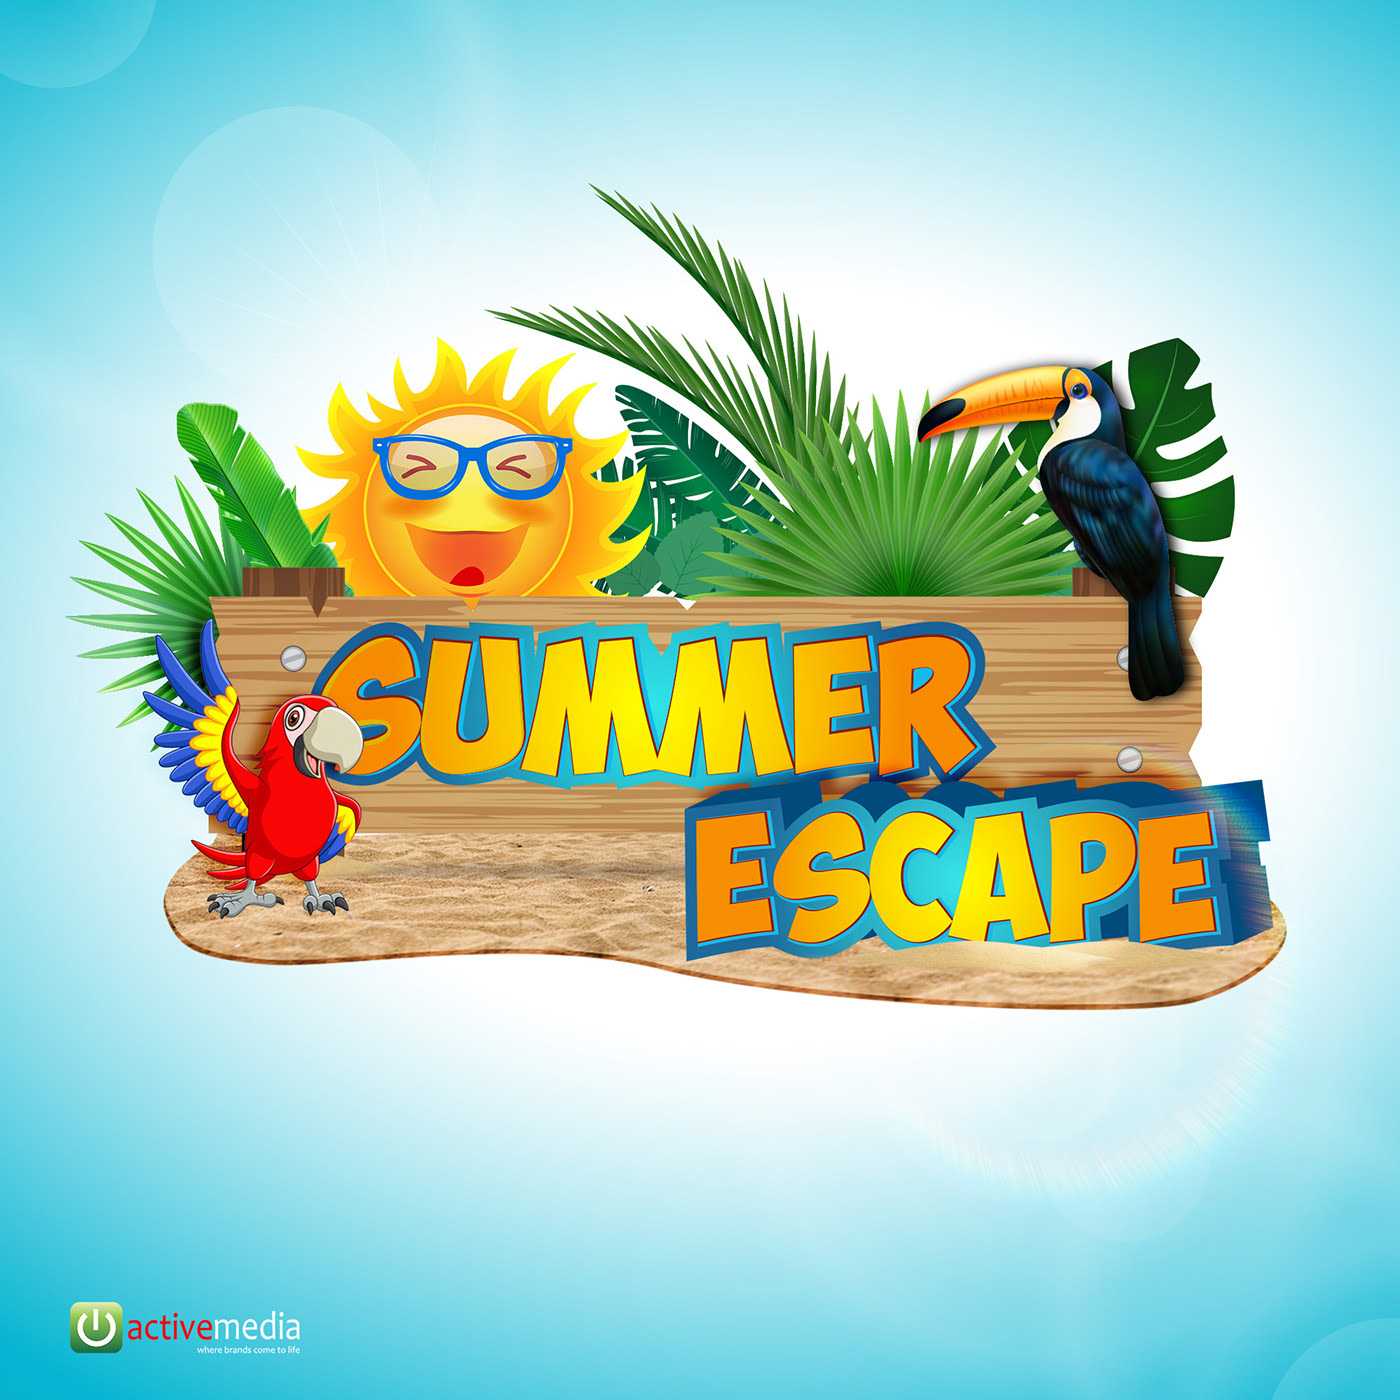 Summer Escape Packages Mall on Behance